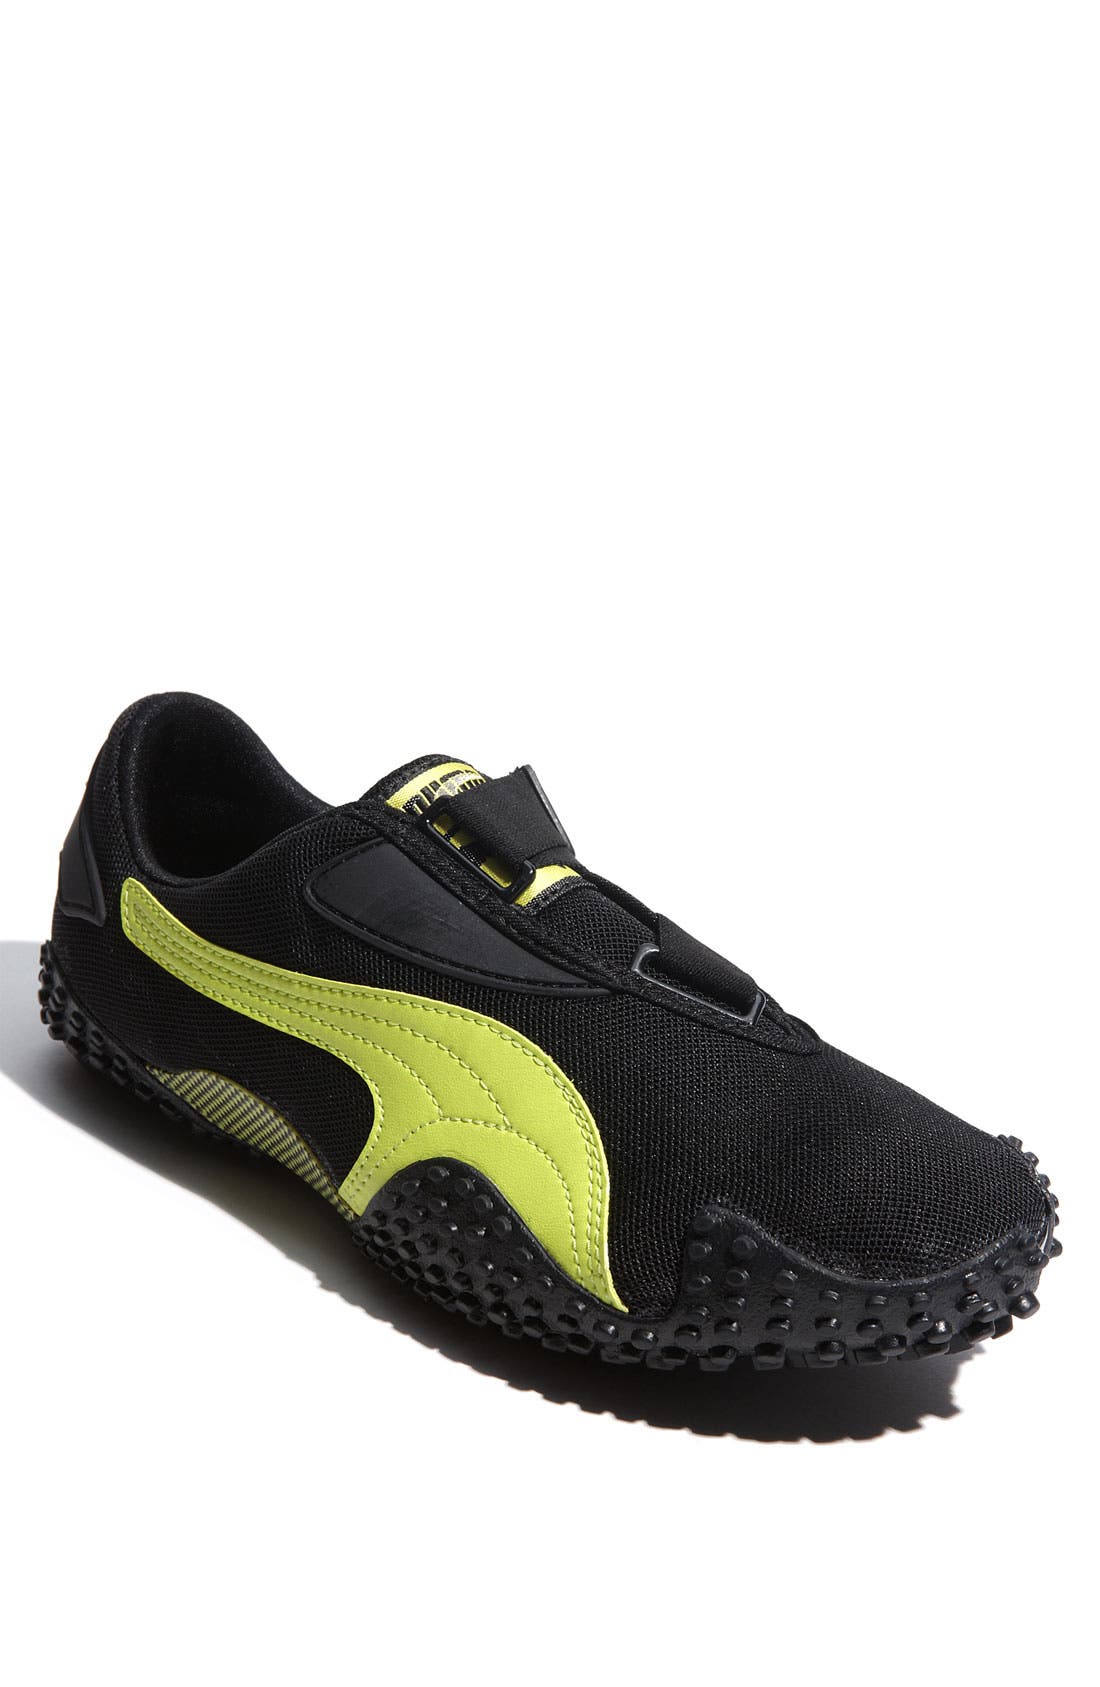 puma casual shoes lowest price